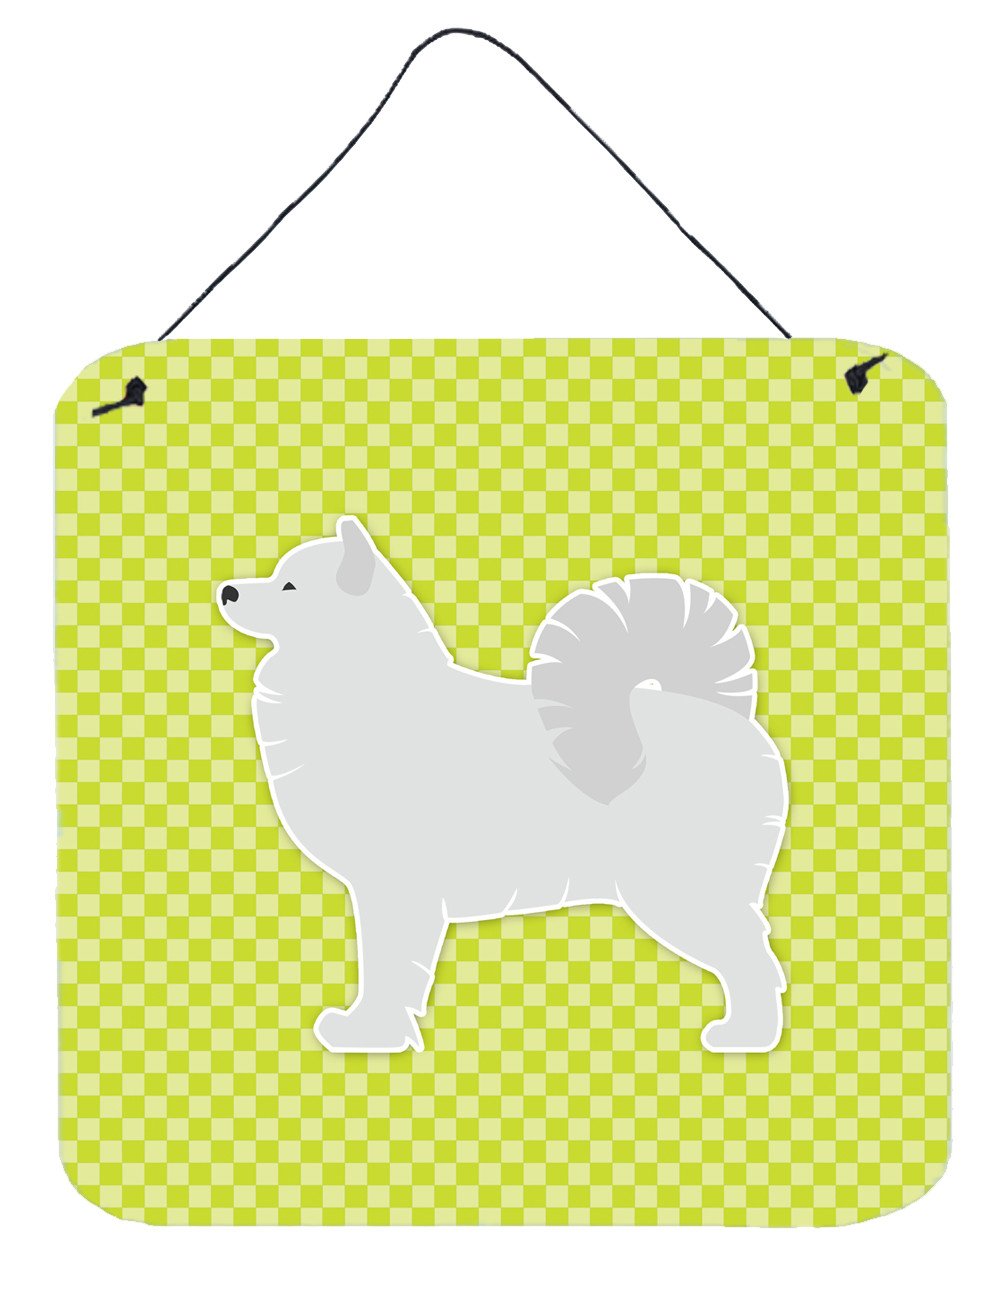 Samoyed Checkerboard Green Wall or Door Hanging Prints BB3859DS66 by Caroline's Treasures